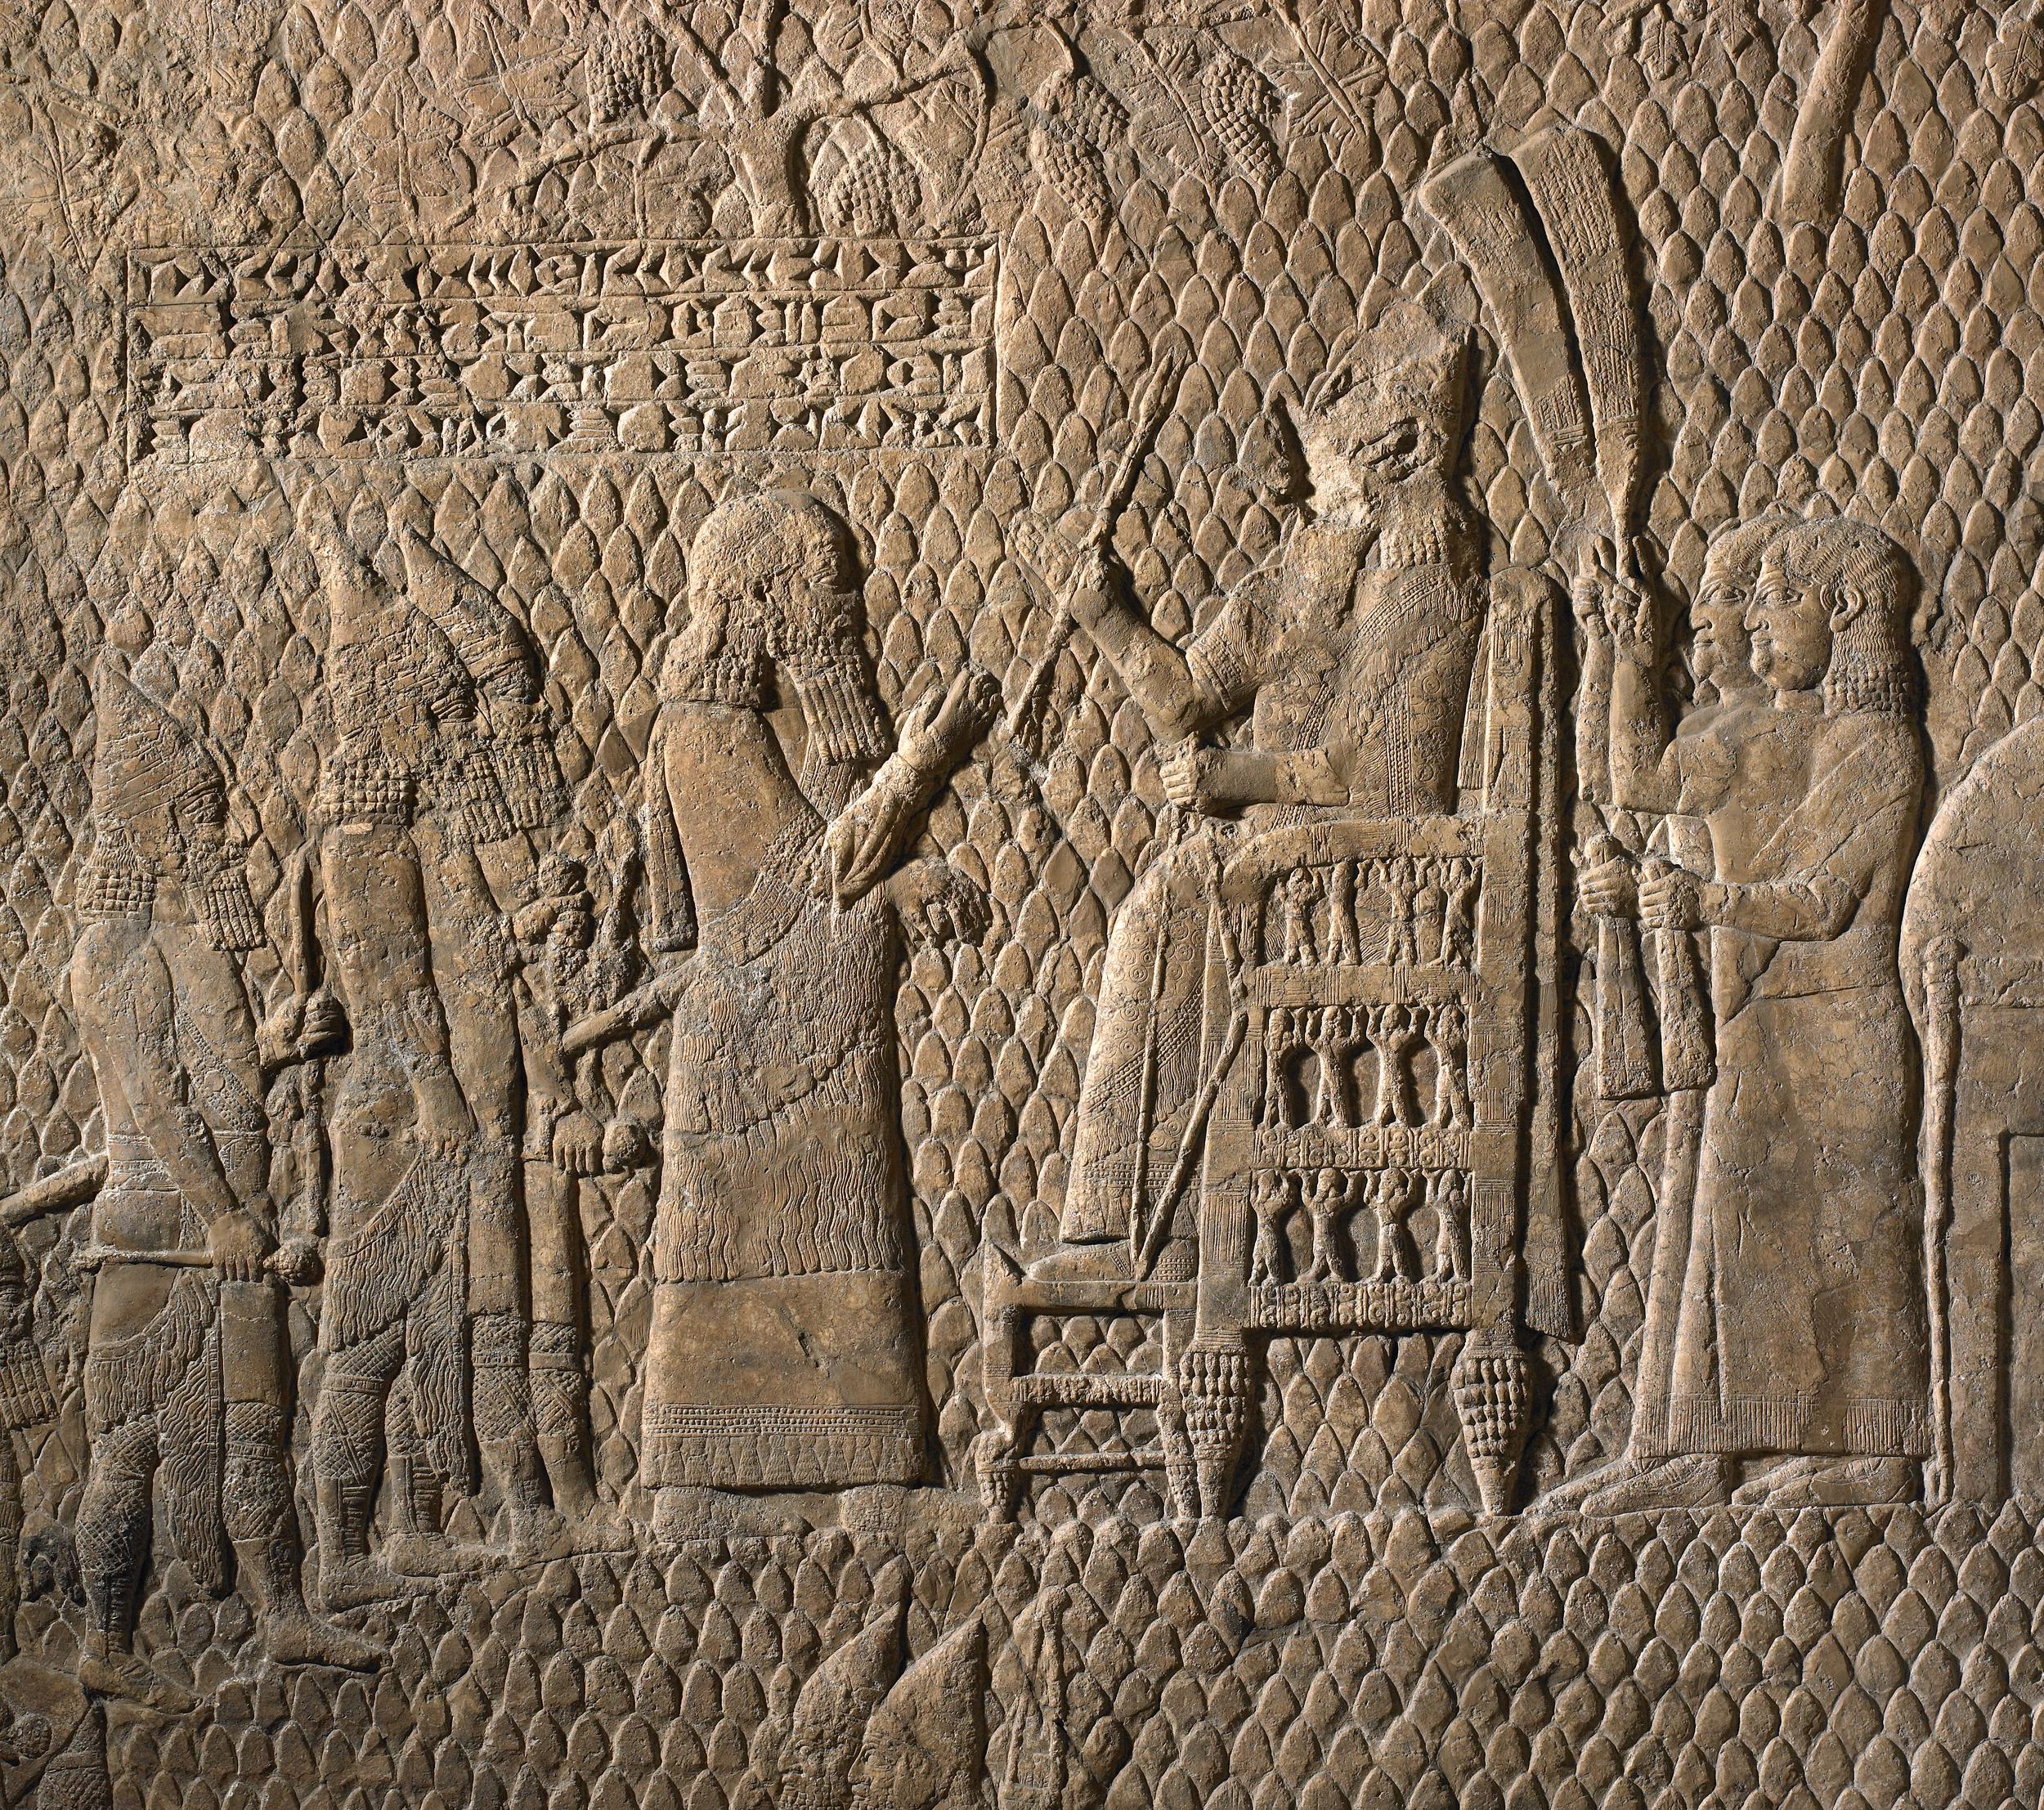 Nineveh: When The Capital Of Assyria Was The Most Dazzling City In The World